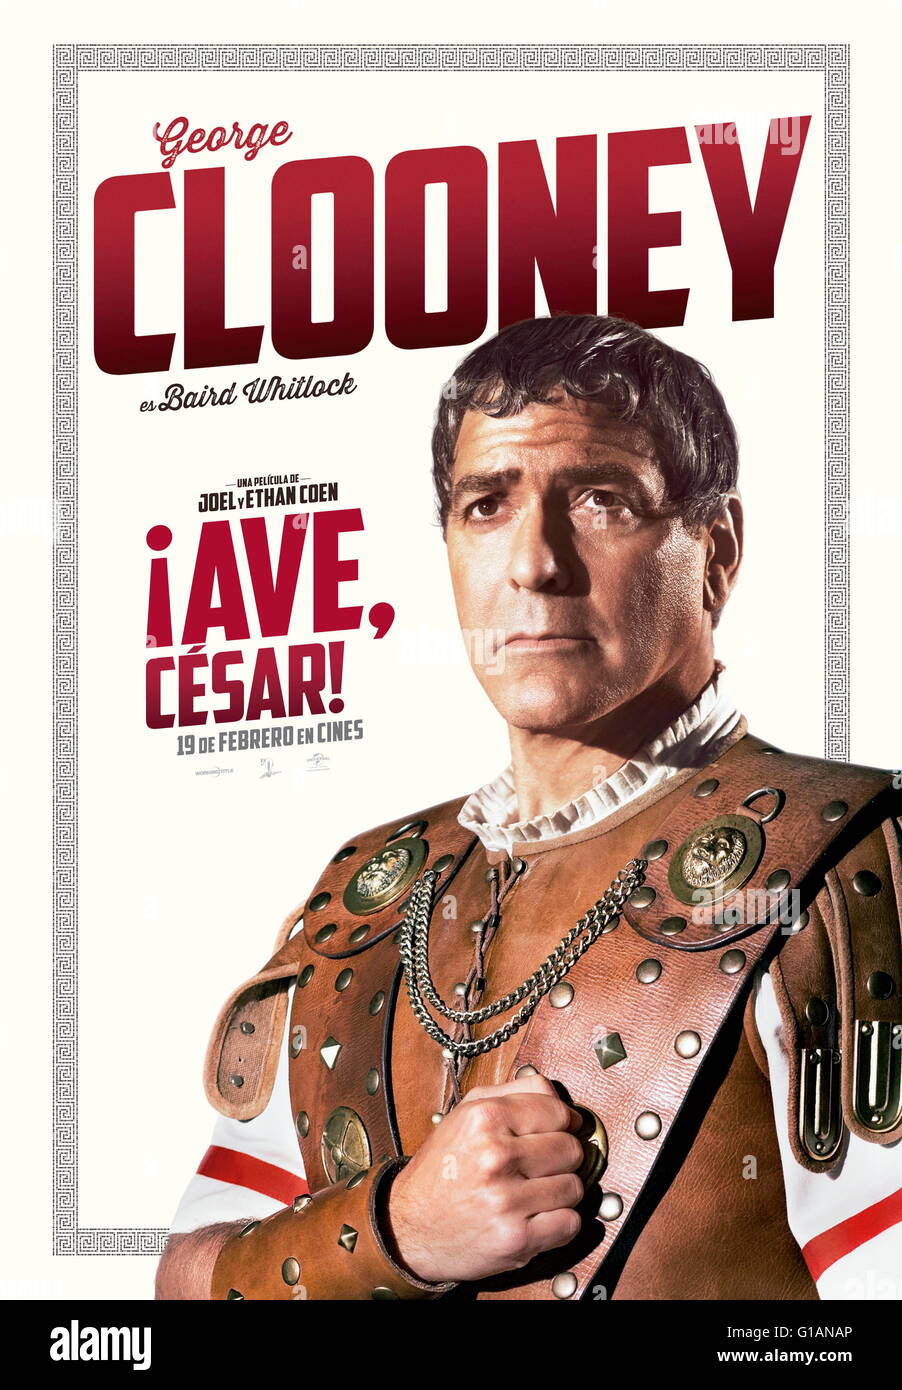 RELEASE DATE: February 5, 2016 TITLE: Hail, Caesar! STUDIO: Universal Pictures DIRECTOR: Ethan Coen, Joel Coen PLOT: A Hollywood fixer in the 1950s works to keep the studio's stars in line PICTURED: George Clooney (Credit: c Universal Pictures/Entertainment Pictures/) Stock Photo